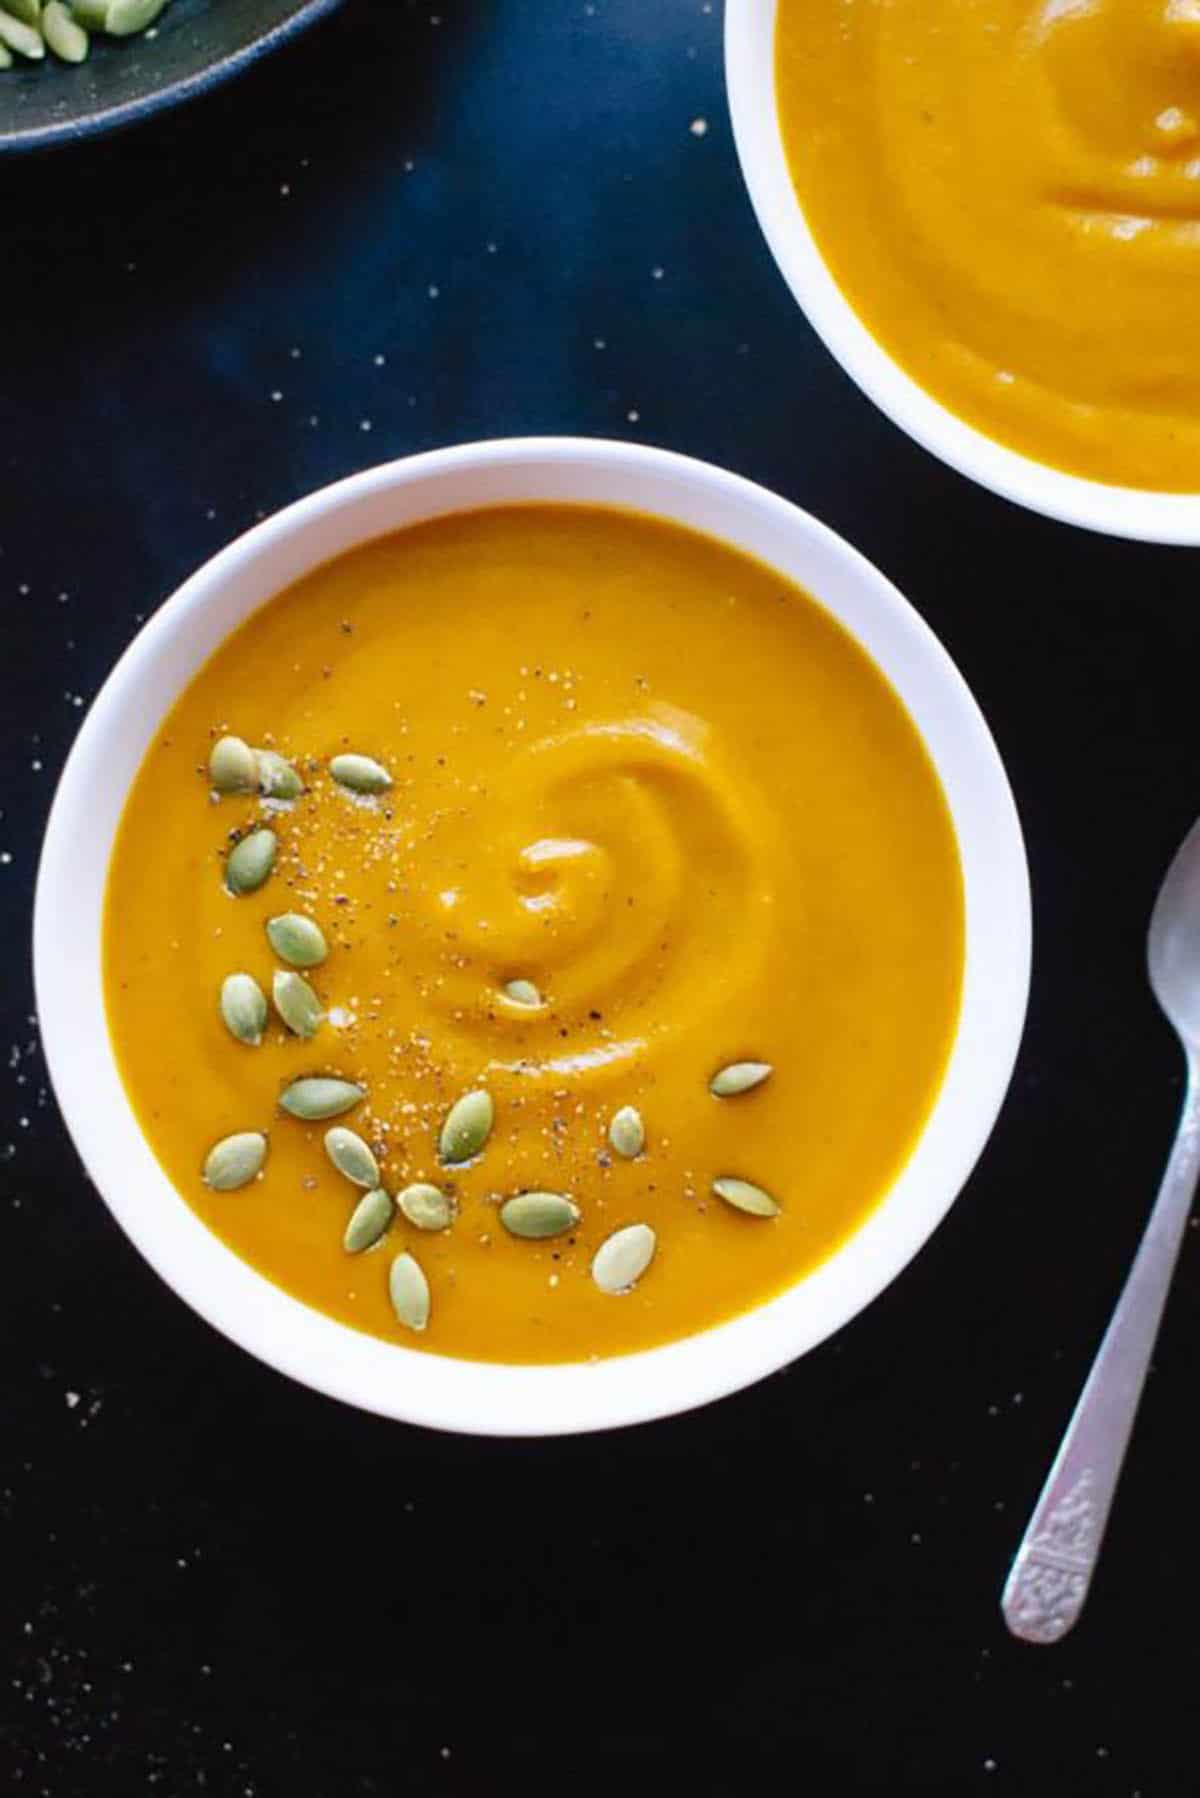 Roasted pumpkin soup made from sugar pie pumpkin, garlic, cinnamon, nutmeg, cloves, cayenne pepper, vegetable broth, heavy cream, maple syrup and topped with toasted pepitas 